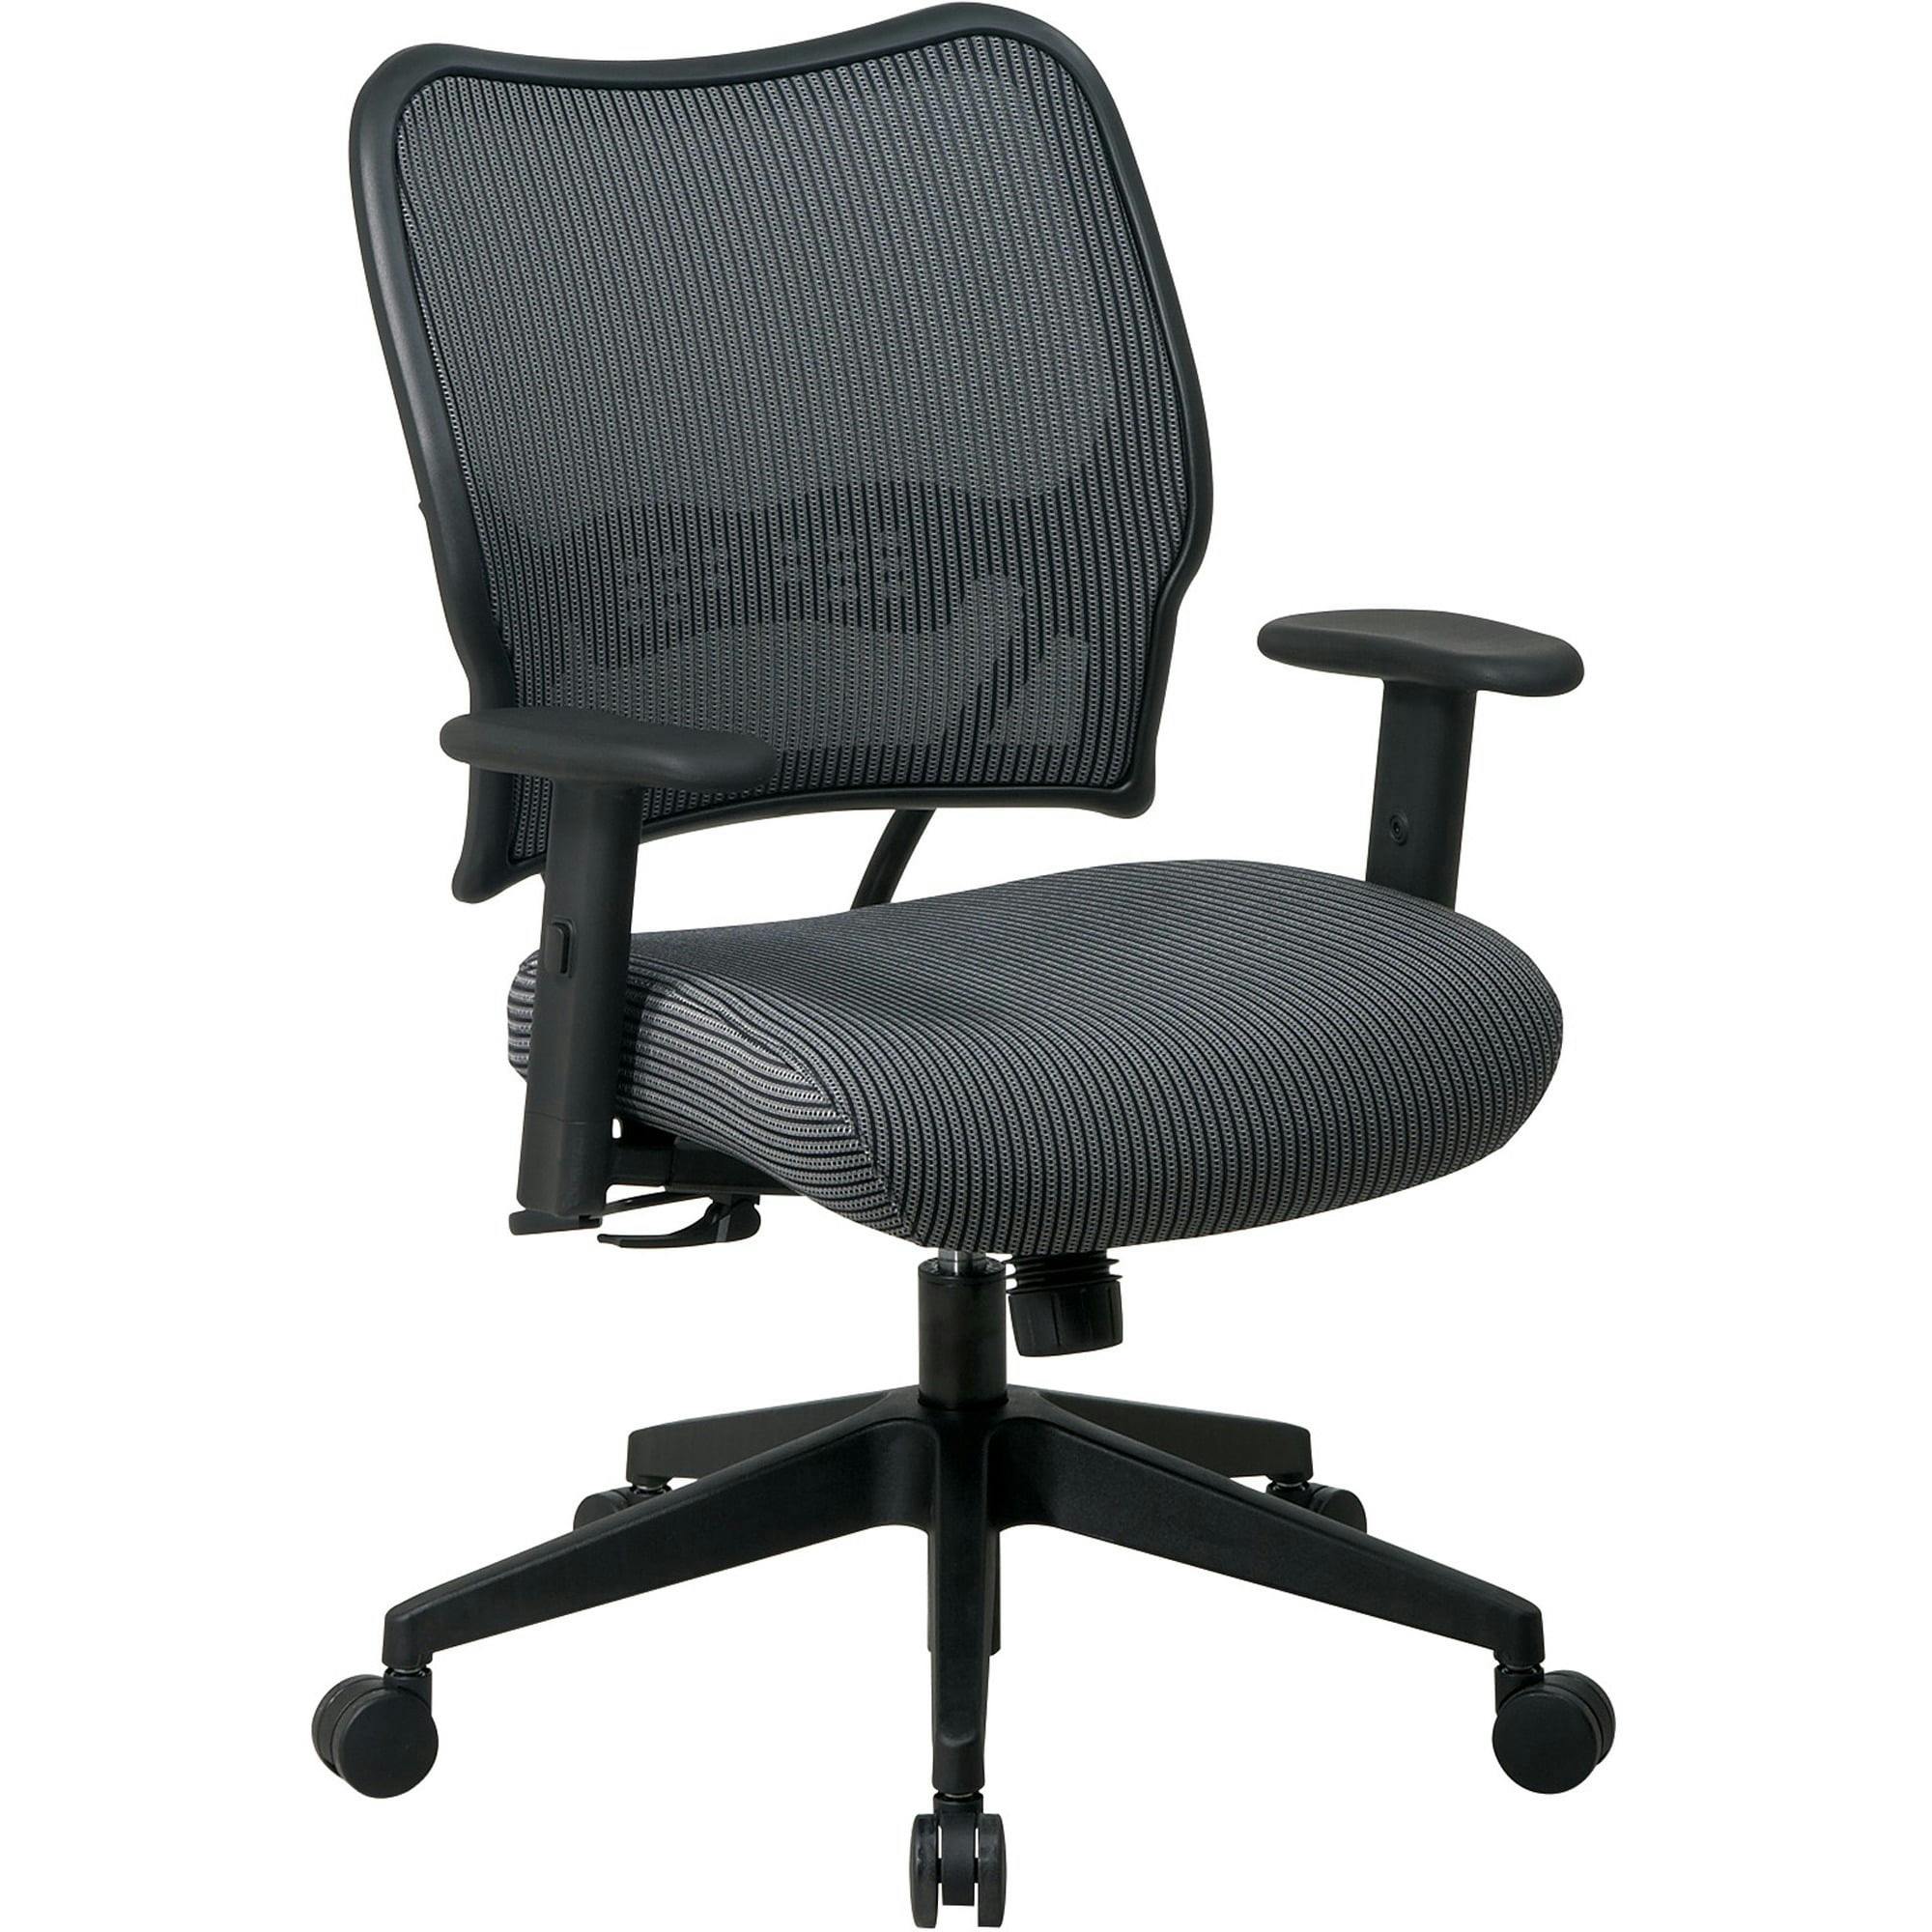 Charcoal VeraFlex Mesh Swivel Task Chair with Adjustable Arms